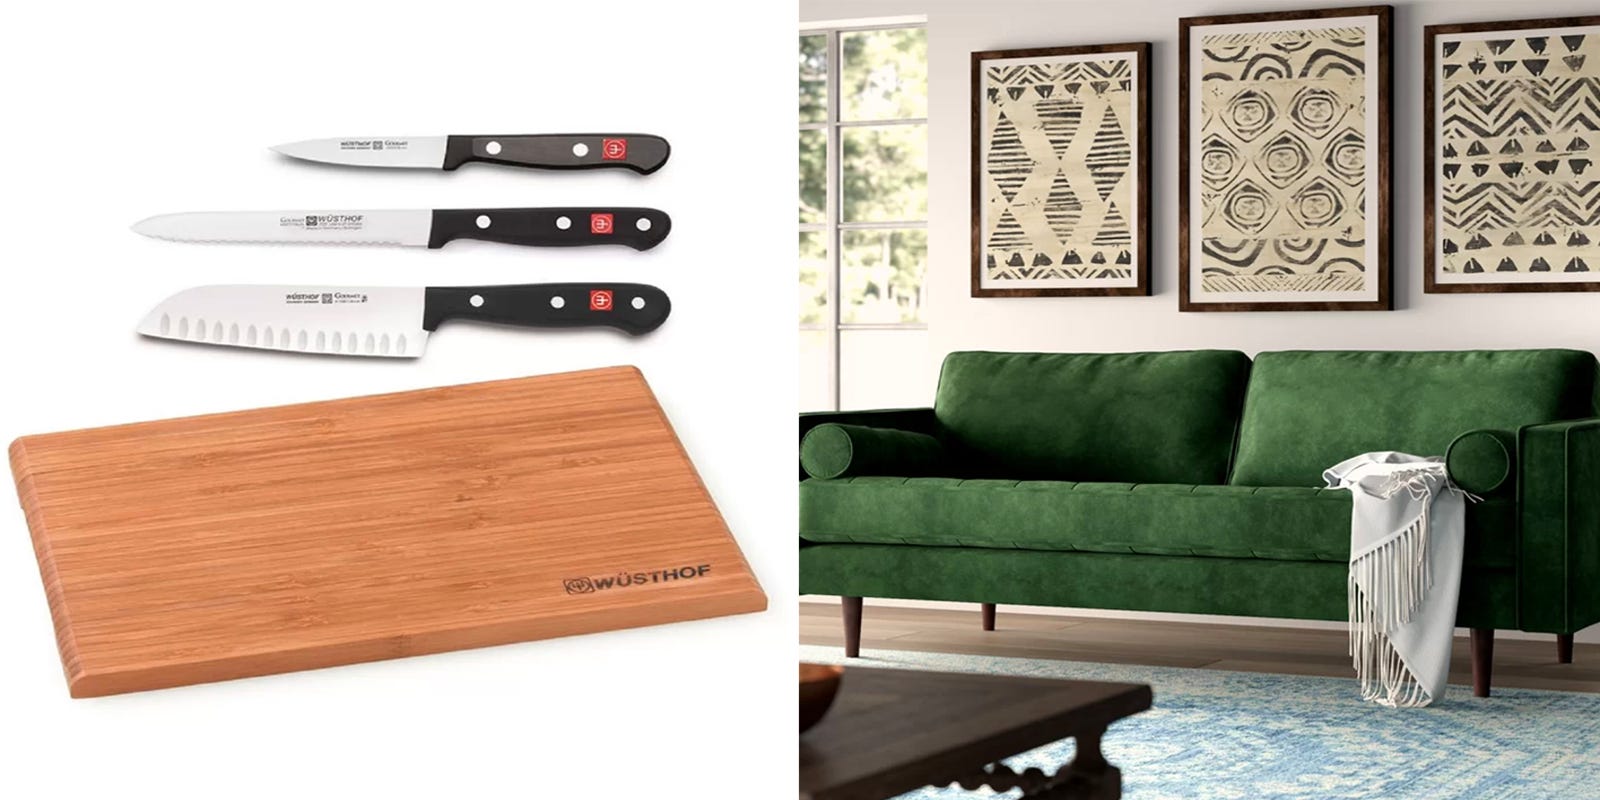 Black Friday 2019: The best early Wayfair deals you can get now